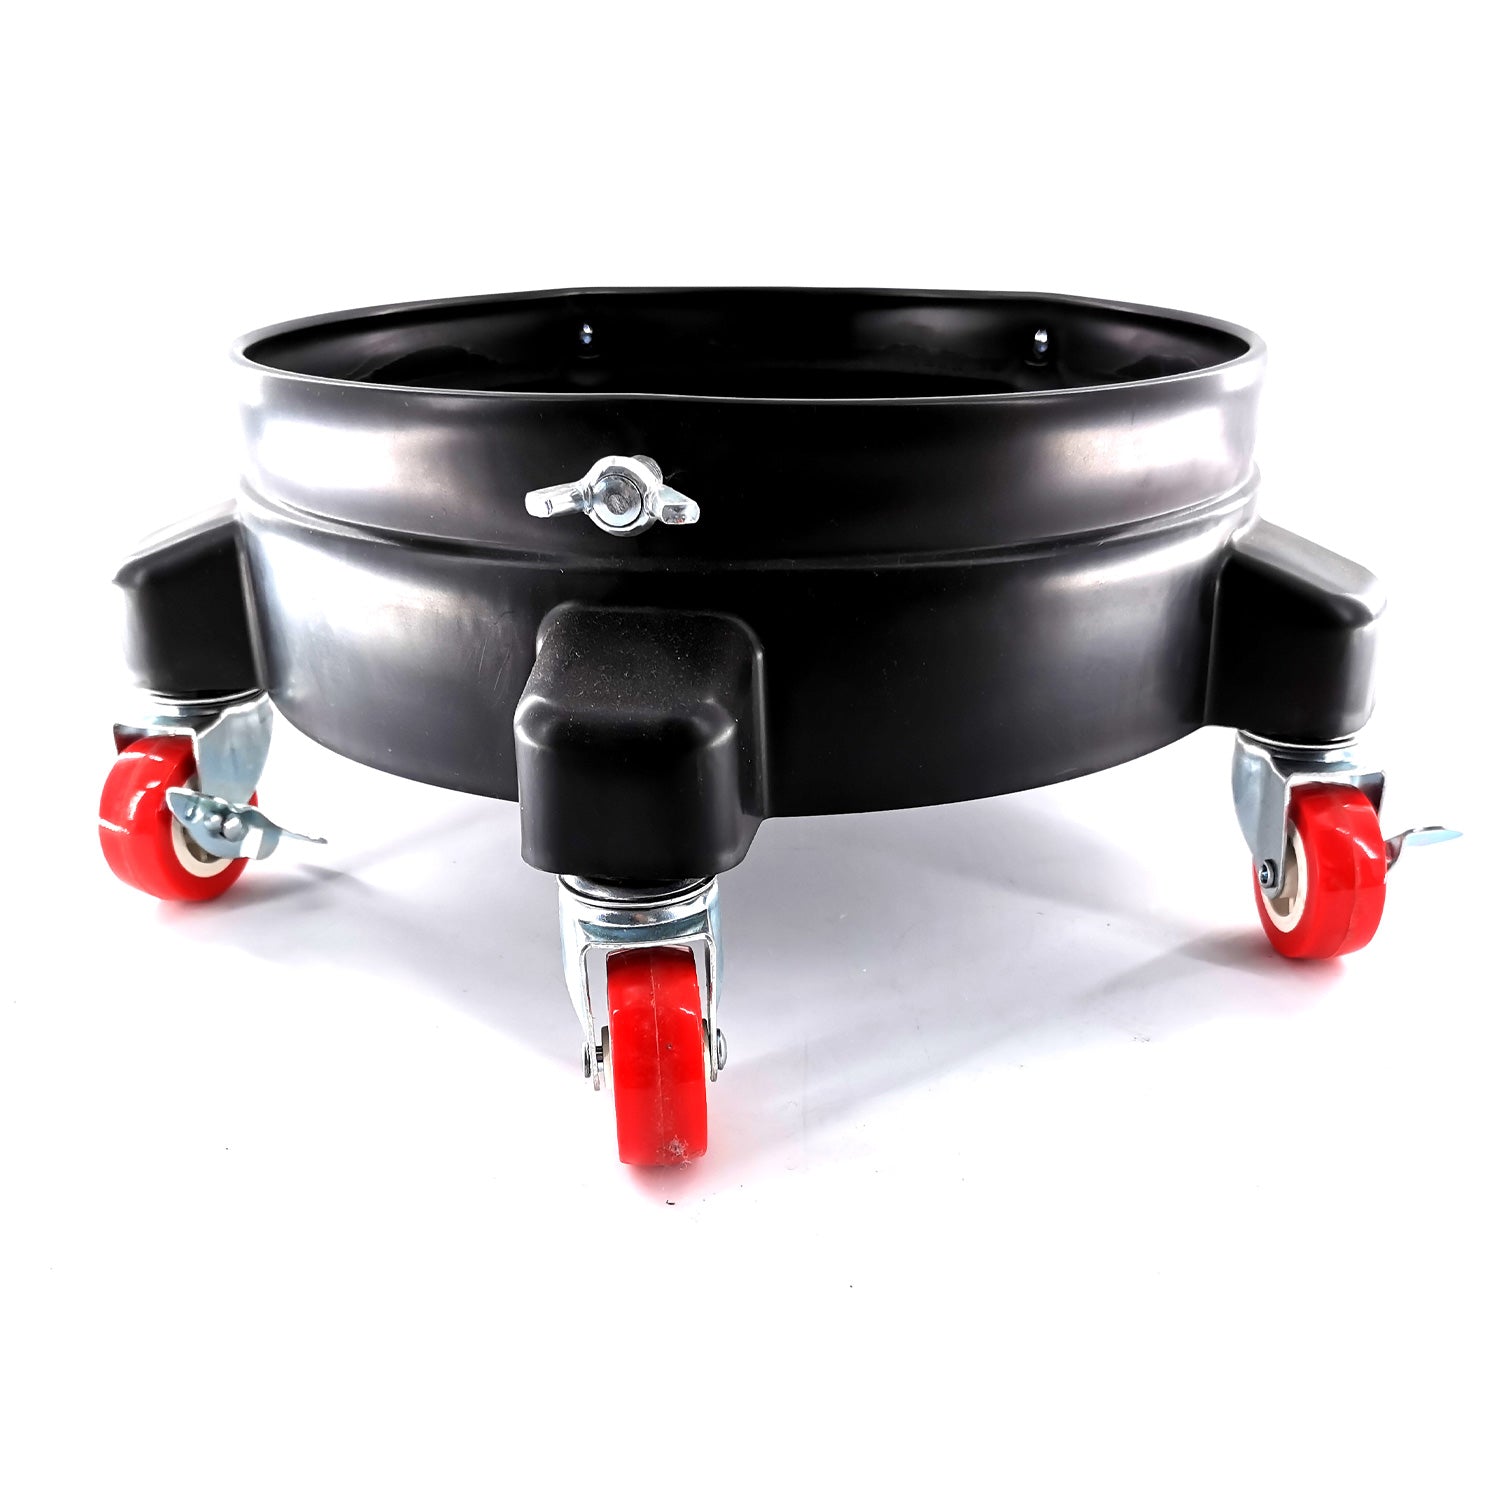 5-gallon-bucket-dolly-with-5-caster-wheels